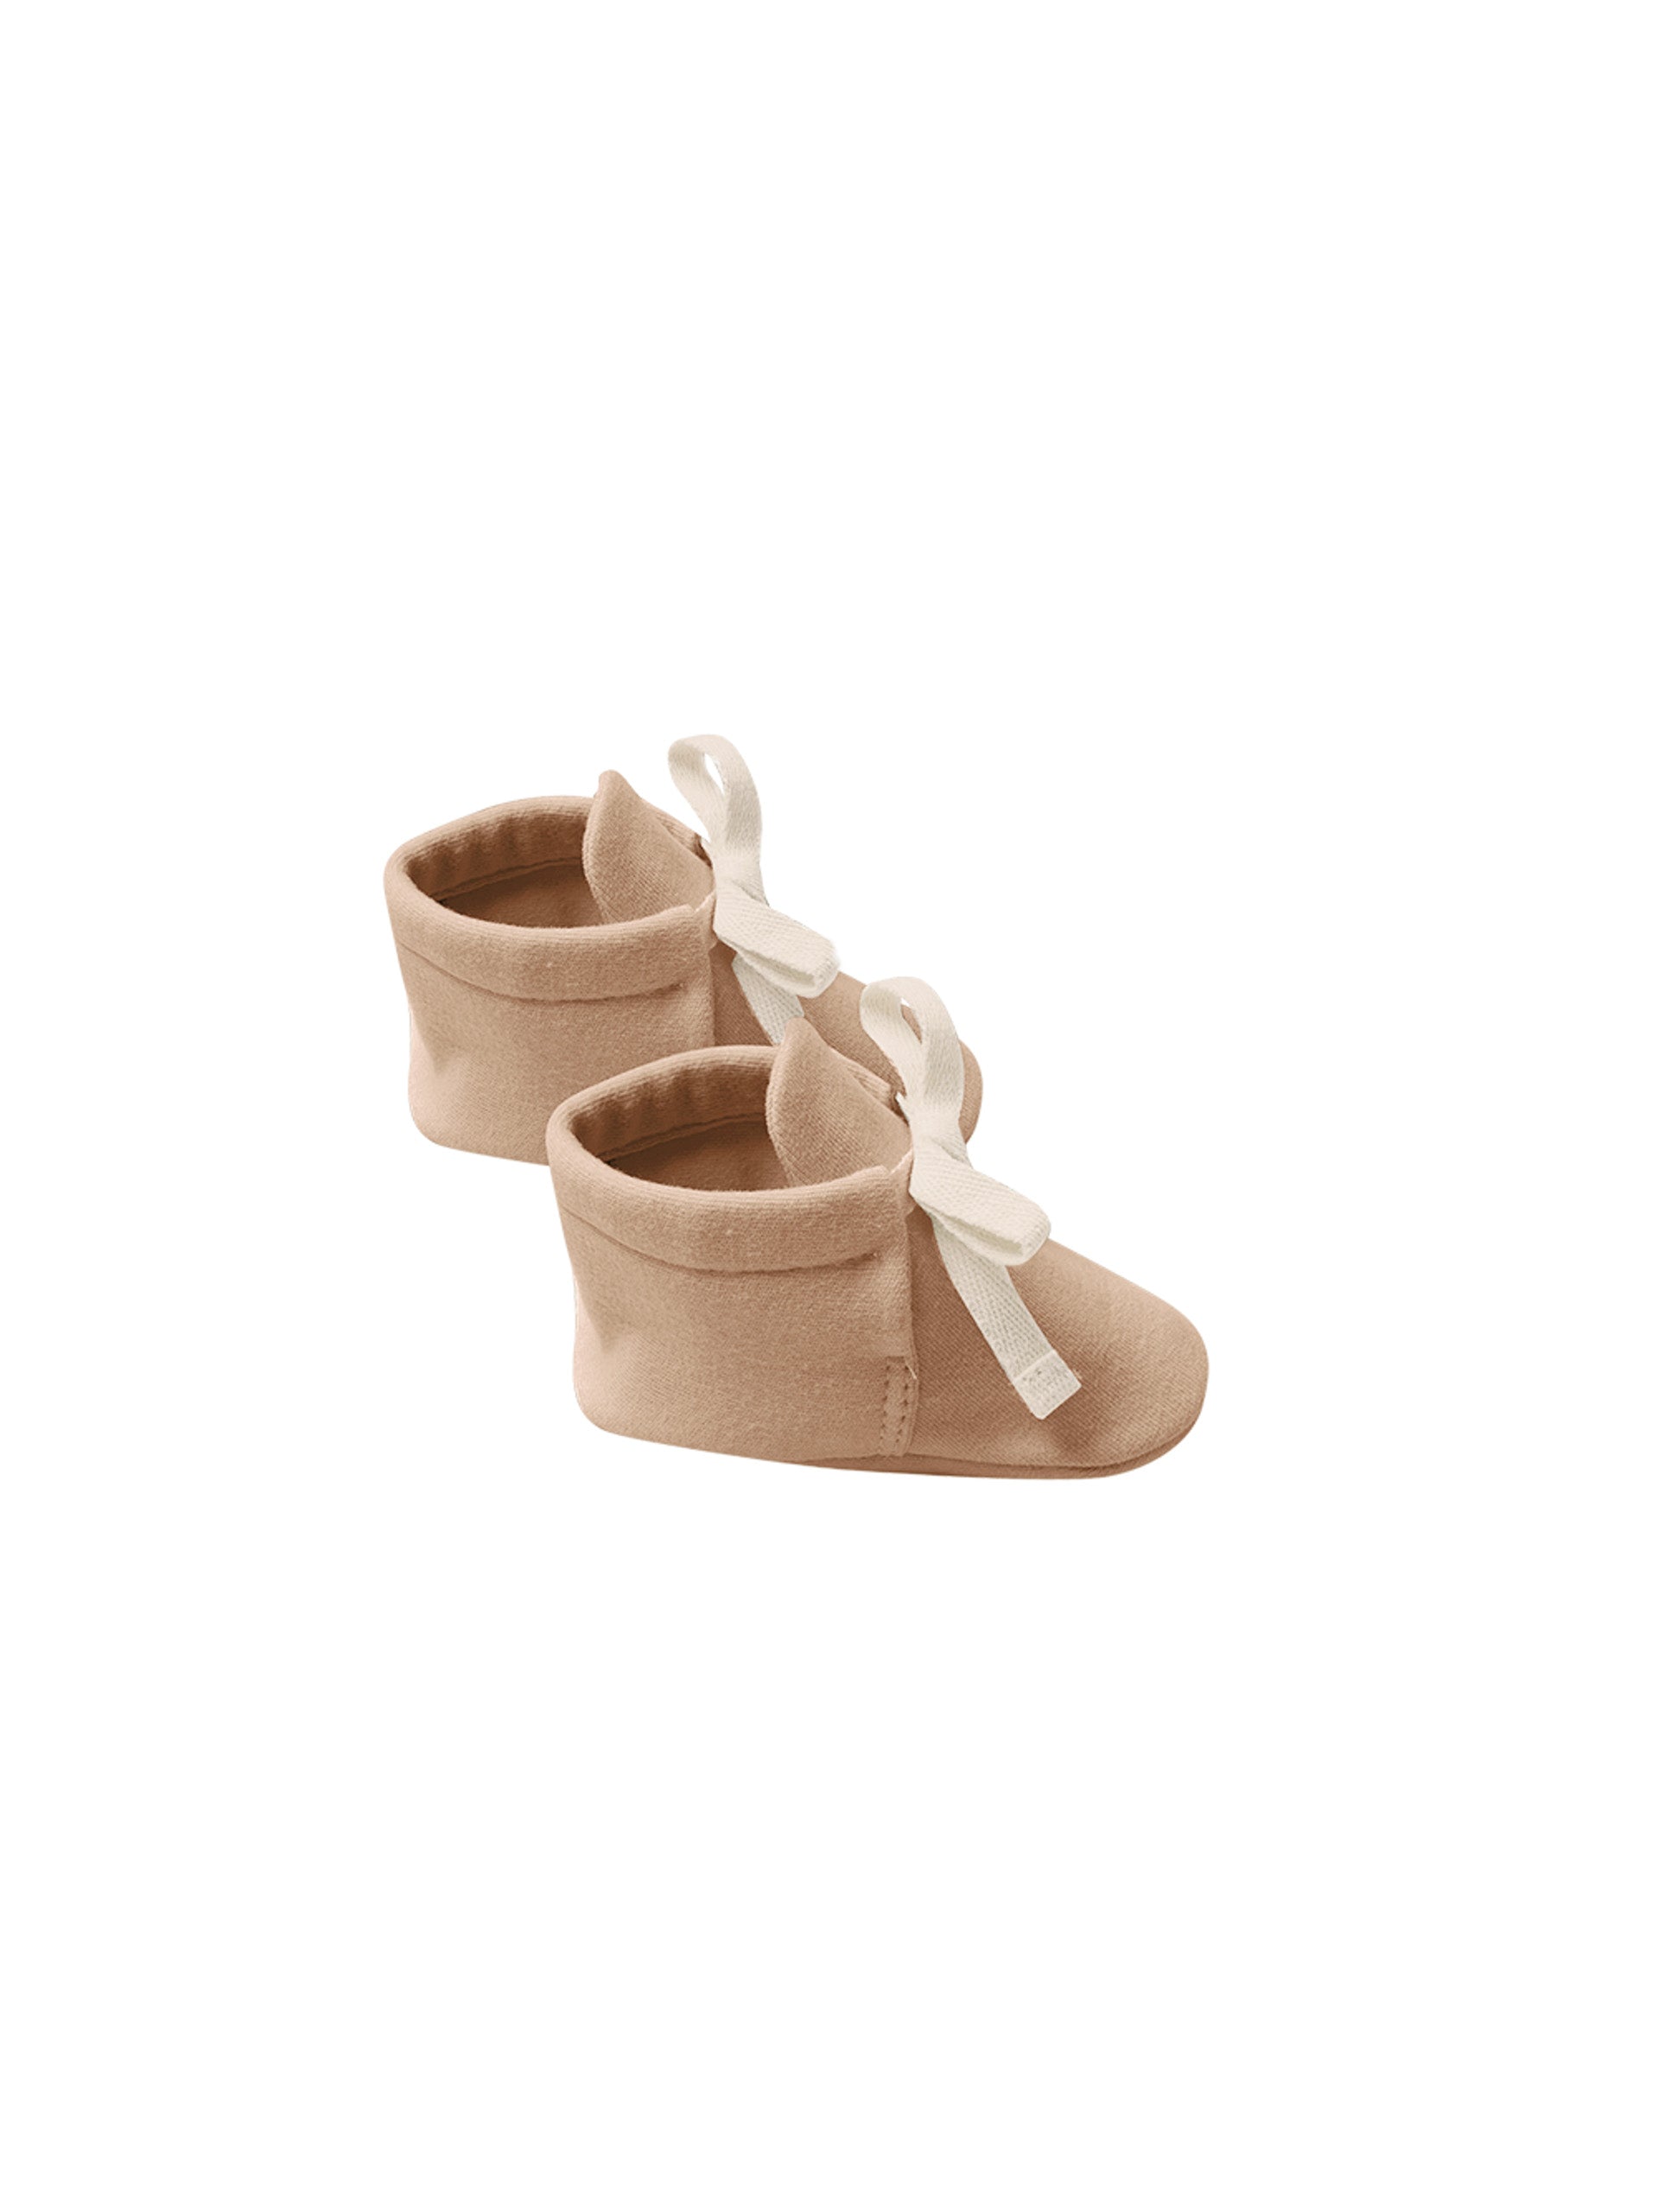 BABY BOOTIES | APRICOT